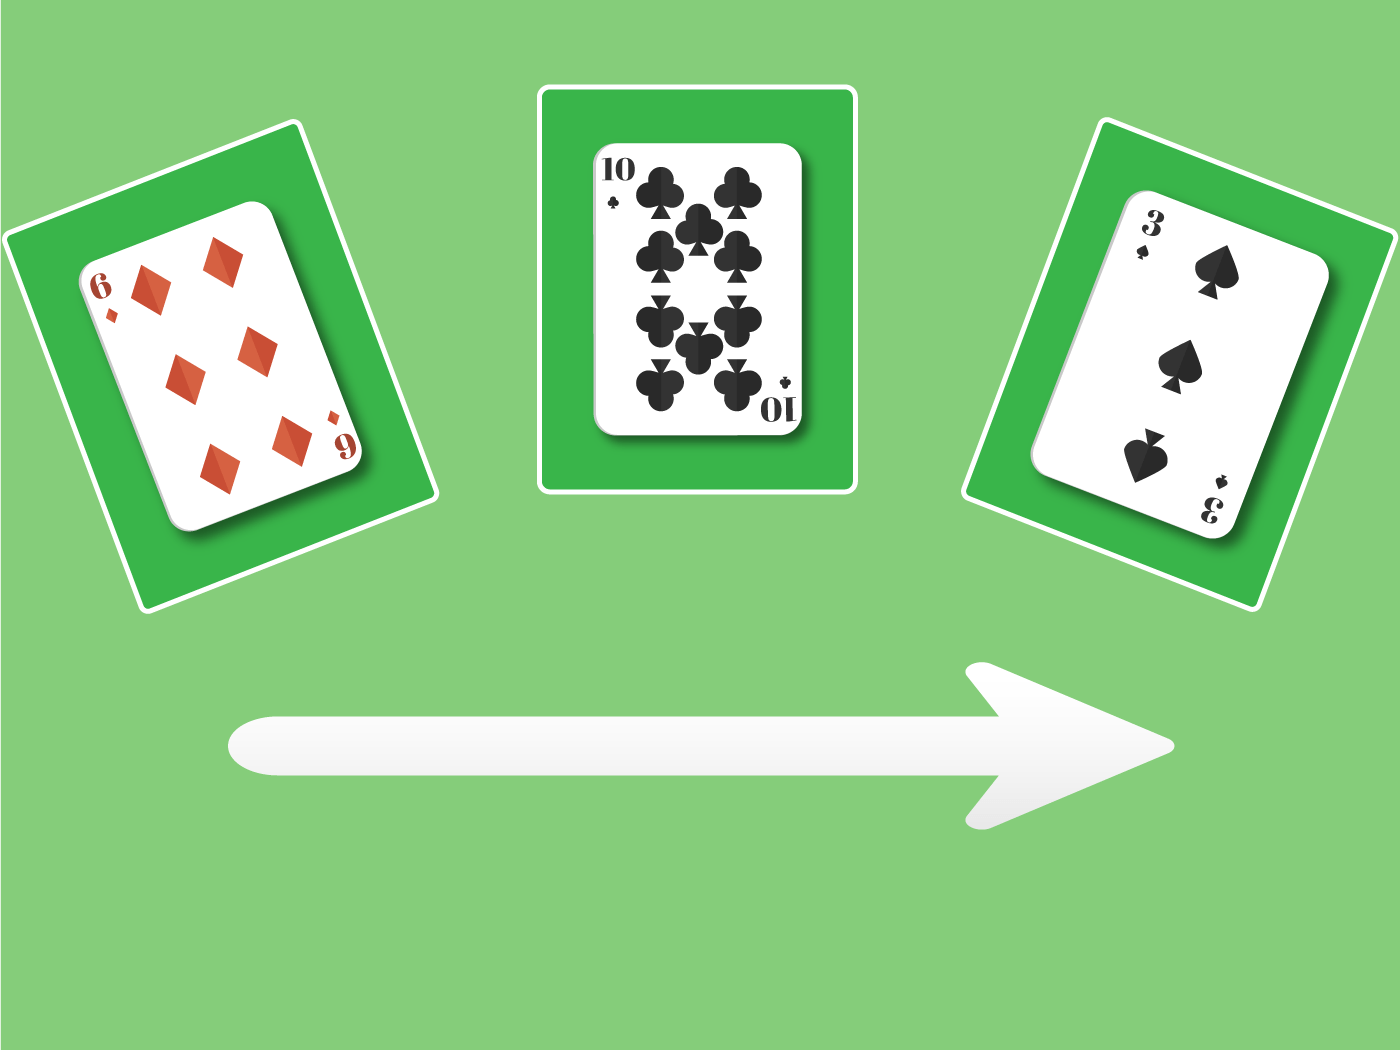 A face up card dealt to three players